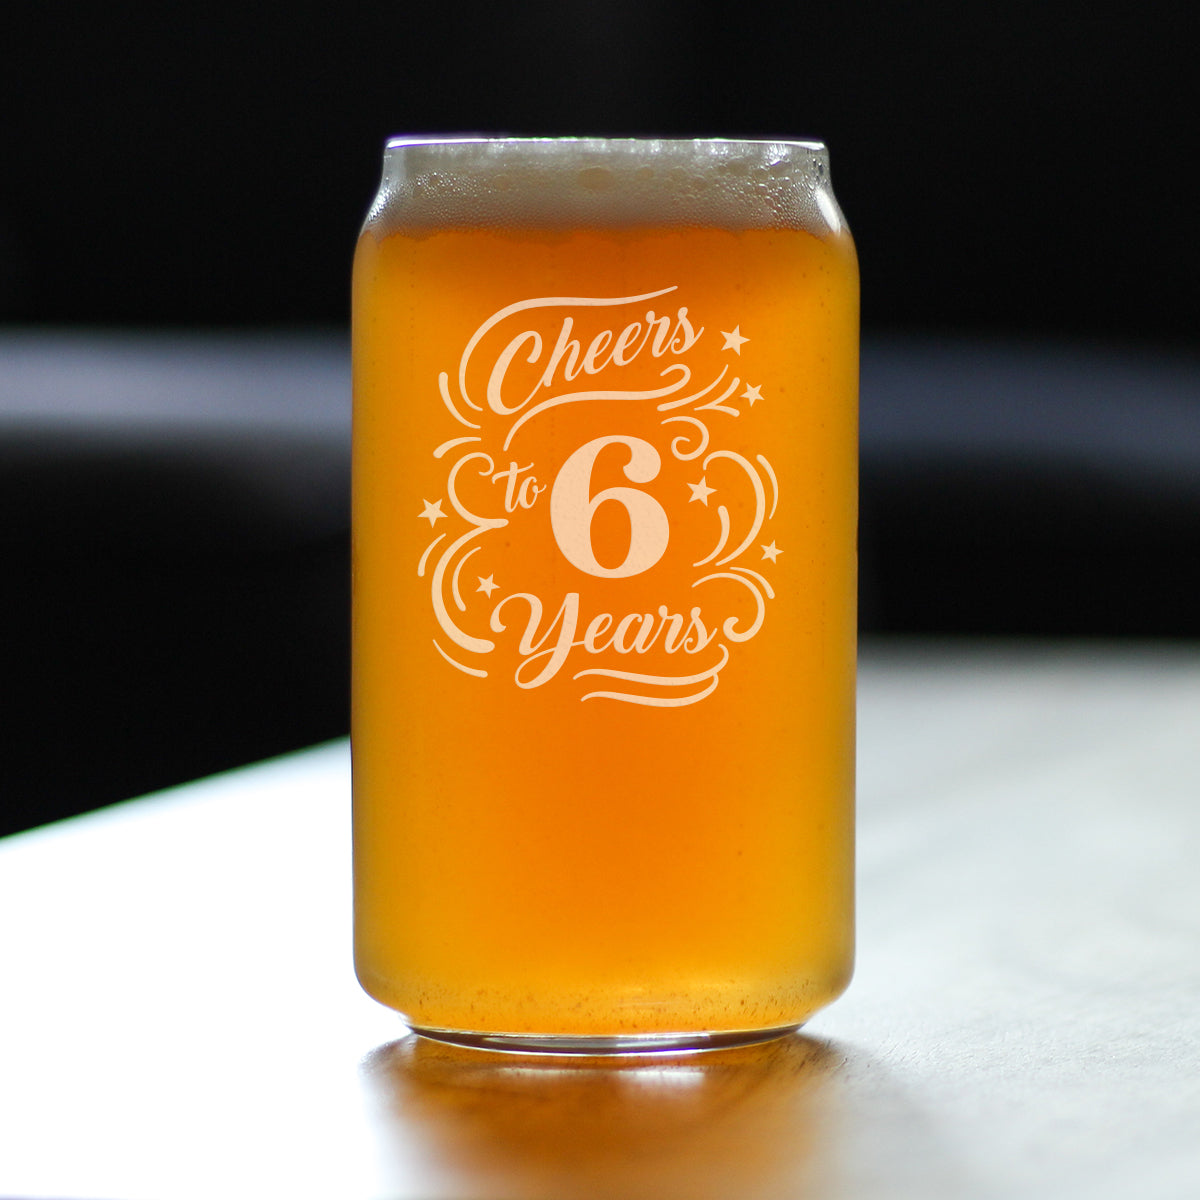 Cheers to 6 Years - Beer Can Pint Glass Gifts for Women &amp; Men - 6th Anniversary Party Decor - 16 Oz Glasses